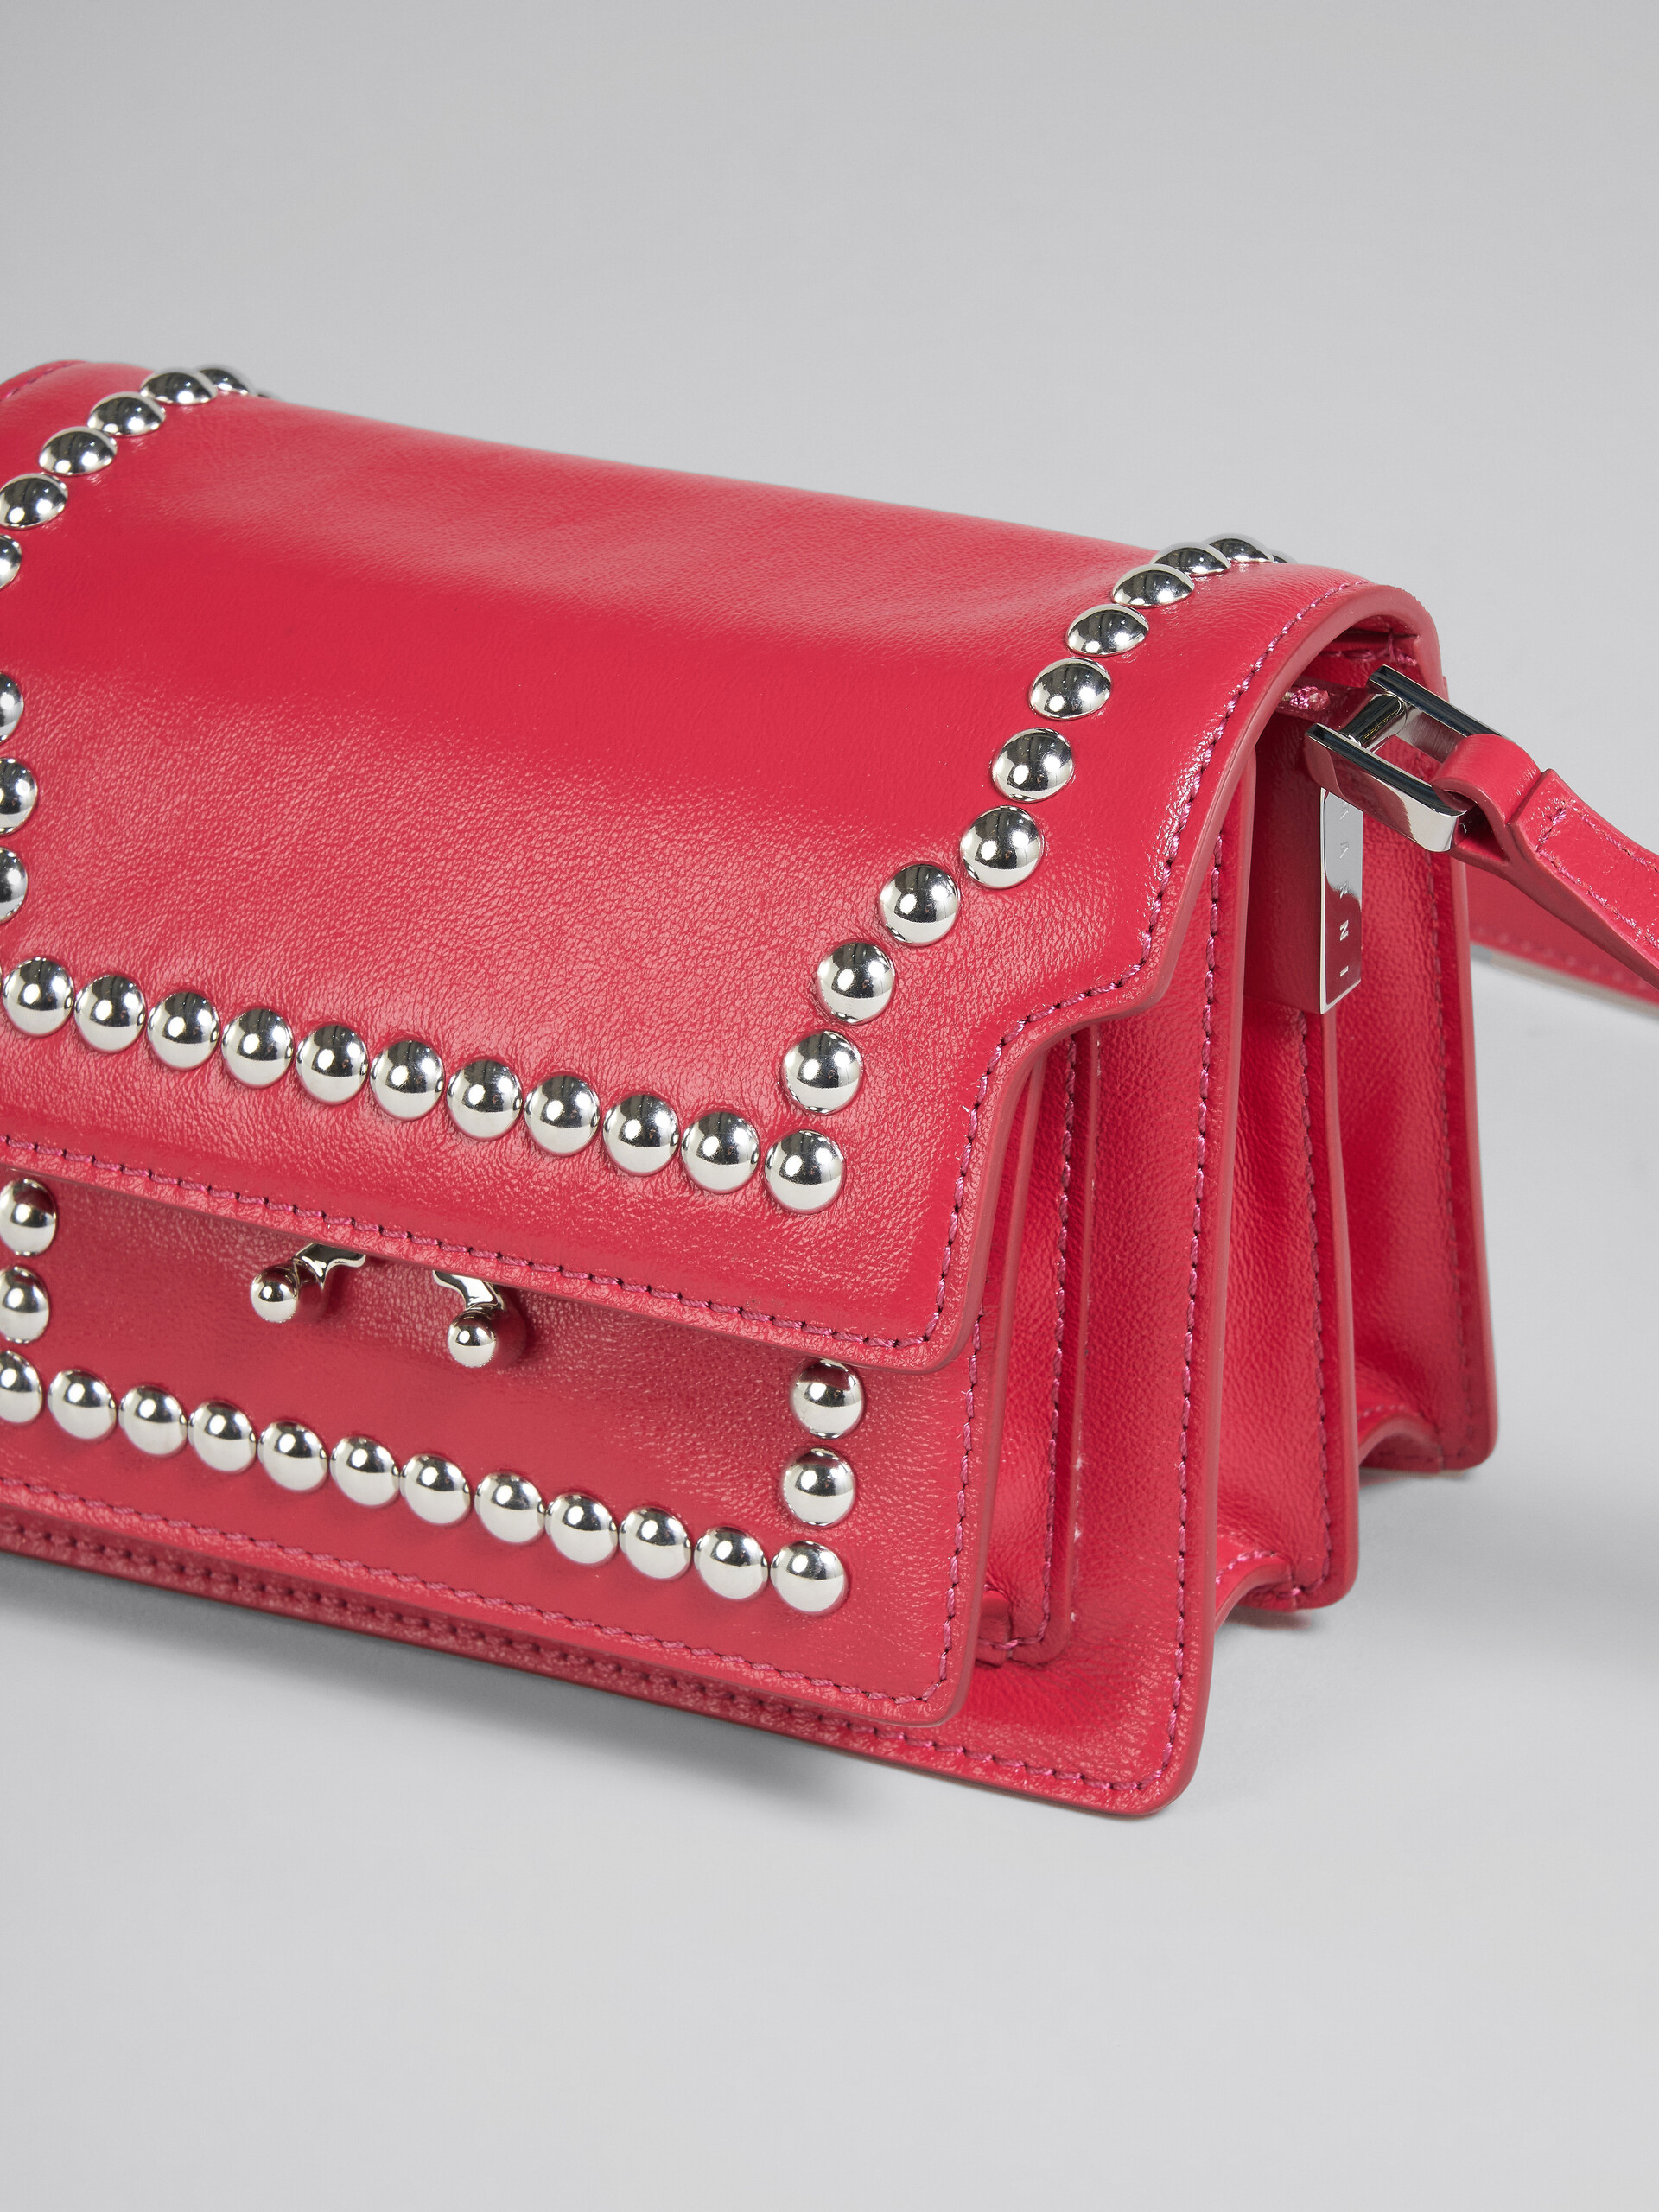 Trunk Soft Mini Bag in red leather with studs - Shoulder Bag - Image 5